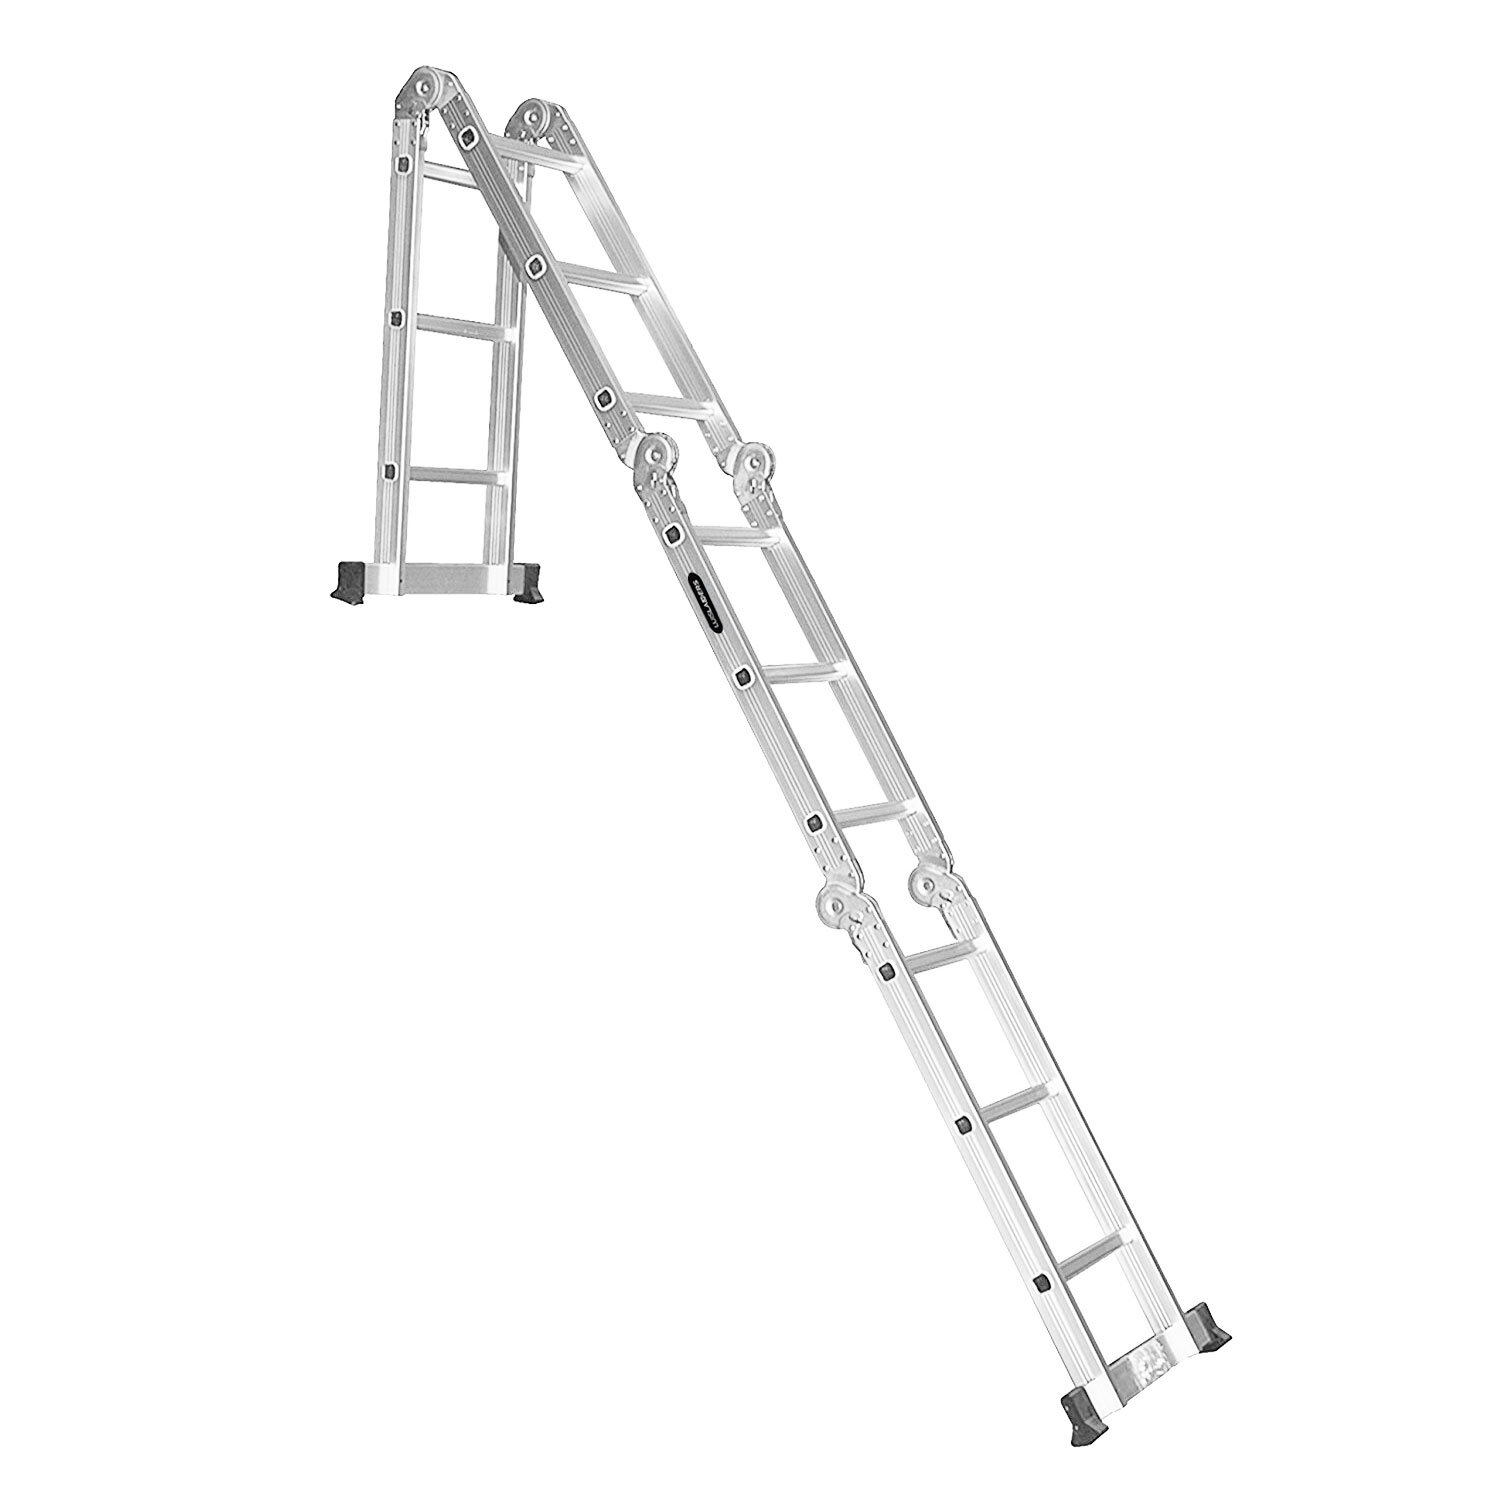 Wfx Utility™ Hershel 125 Ft Aluminum Multi Position Ladder And Reviews